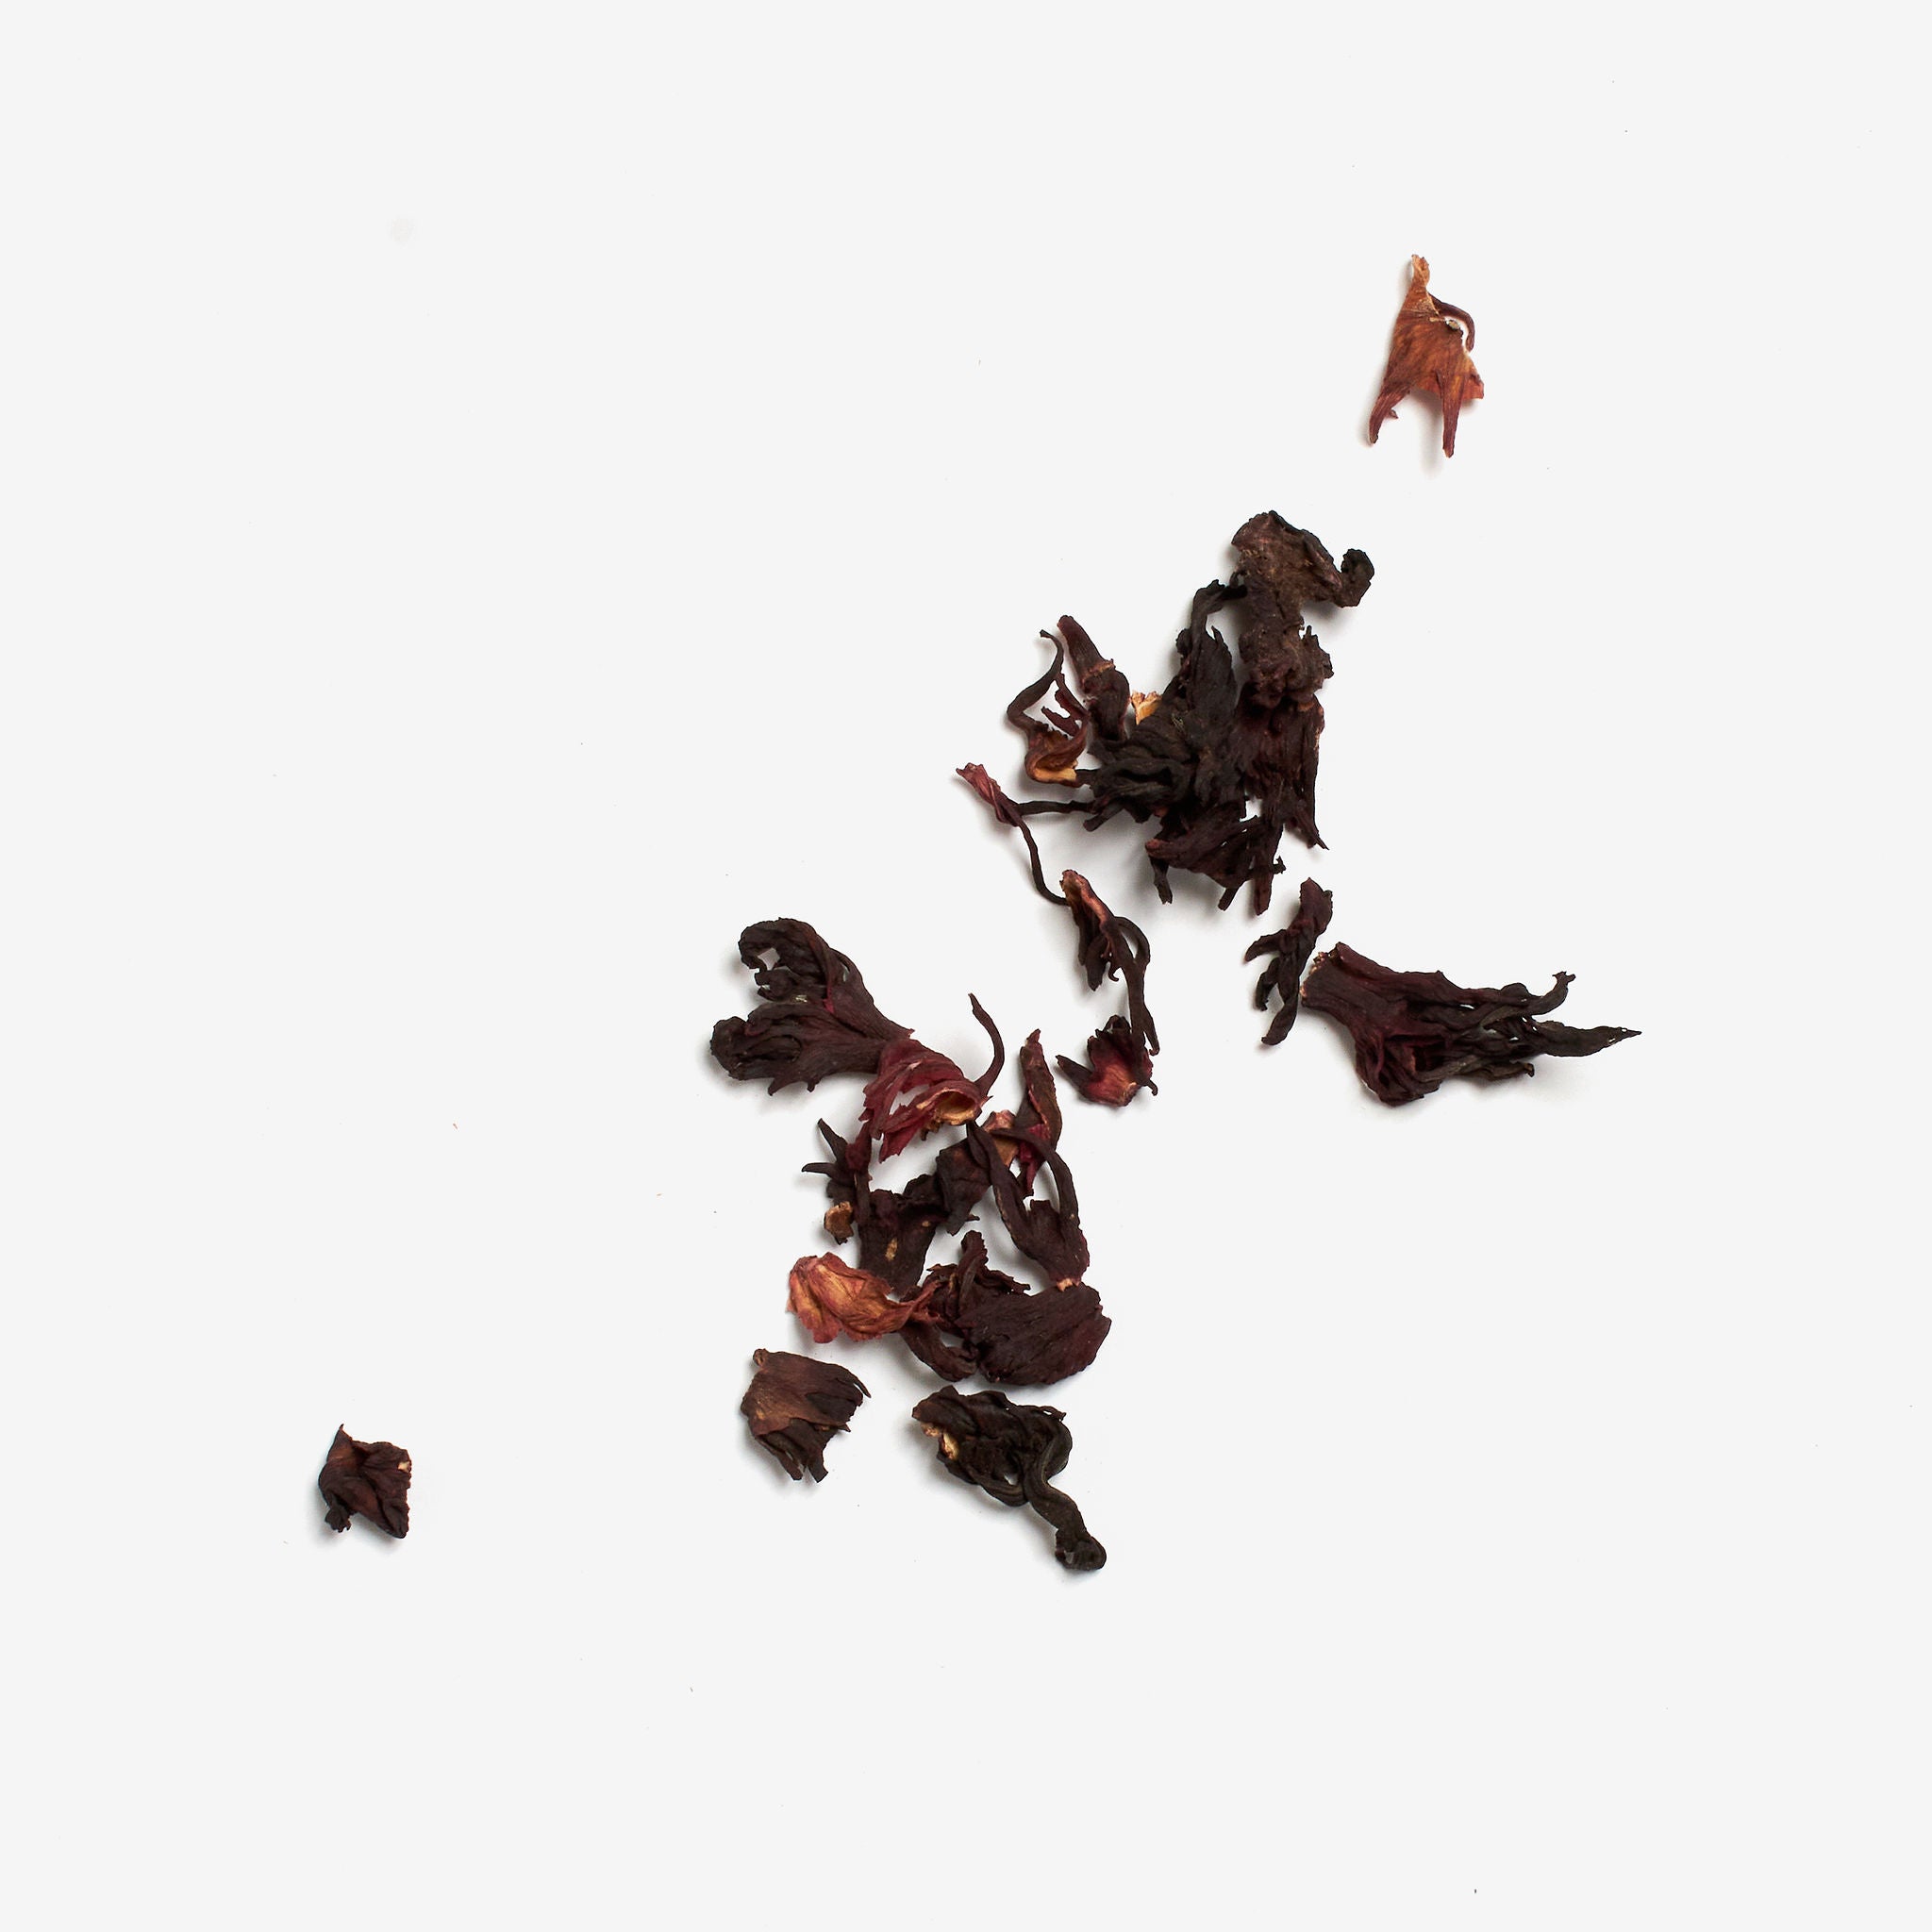 Hibiscus Flowers, Dried